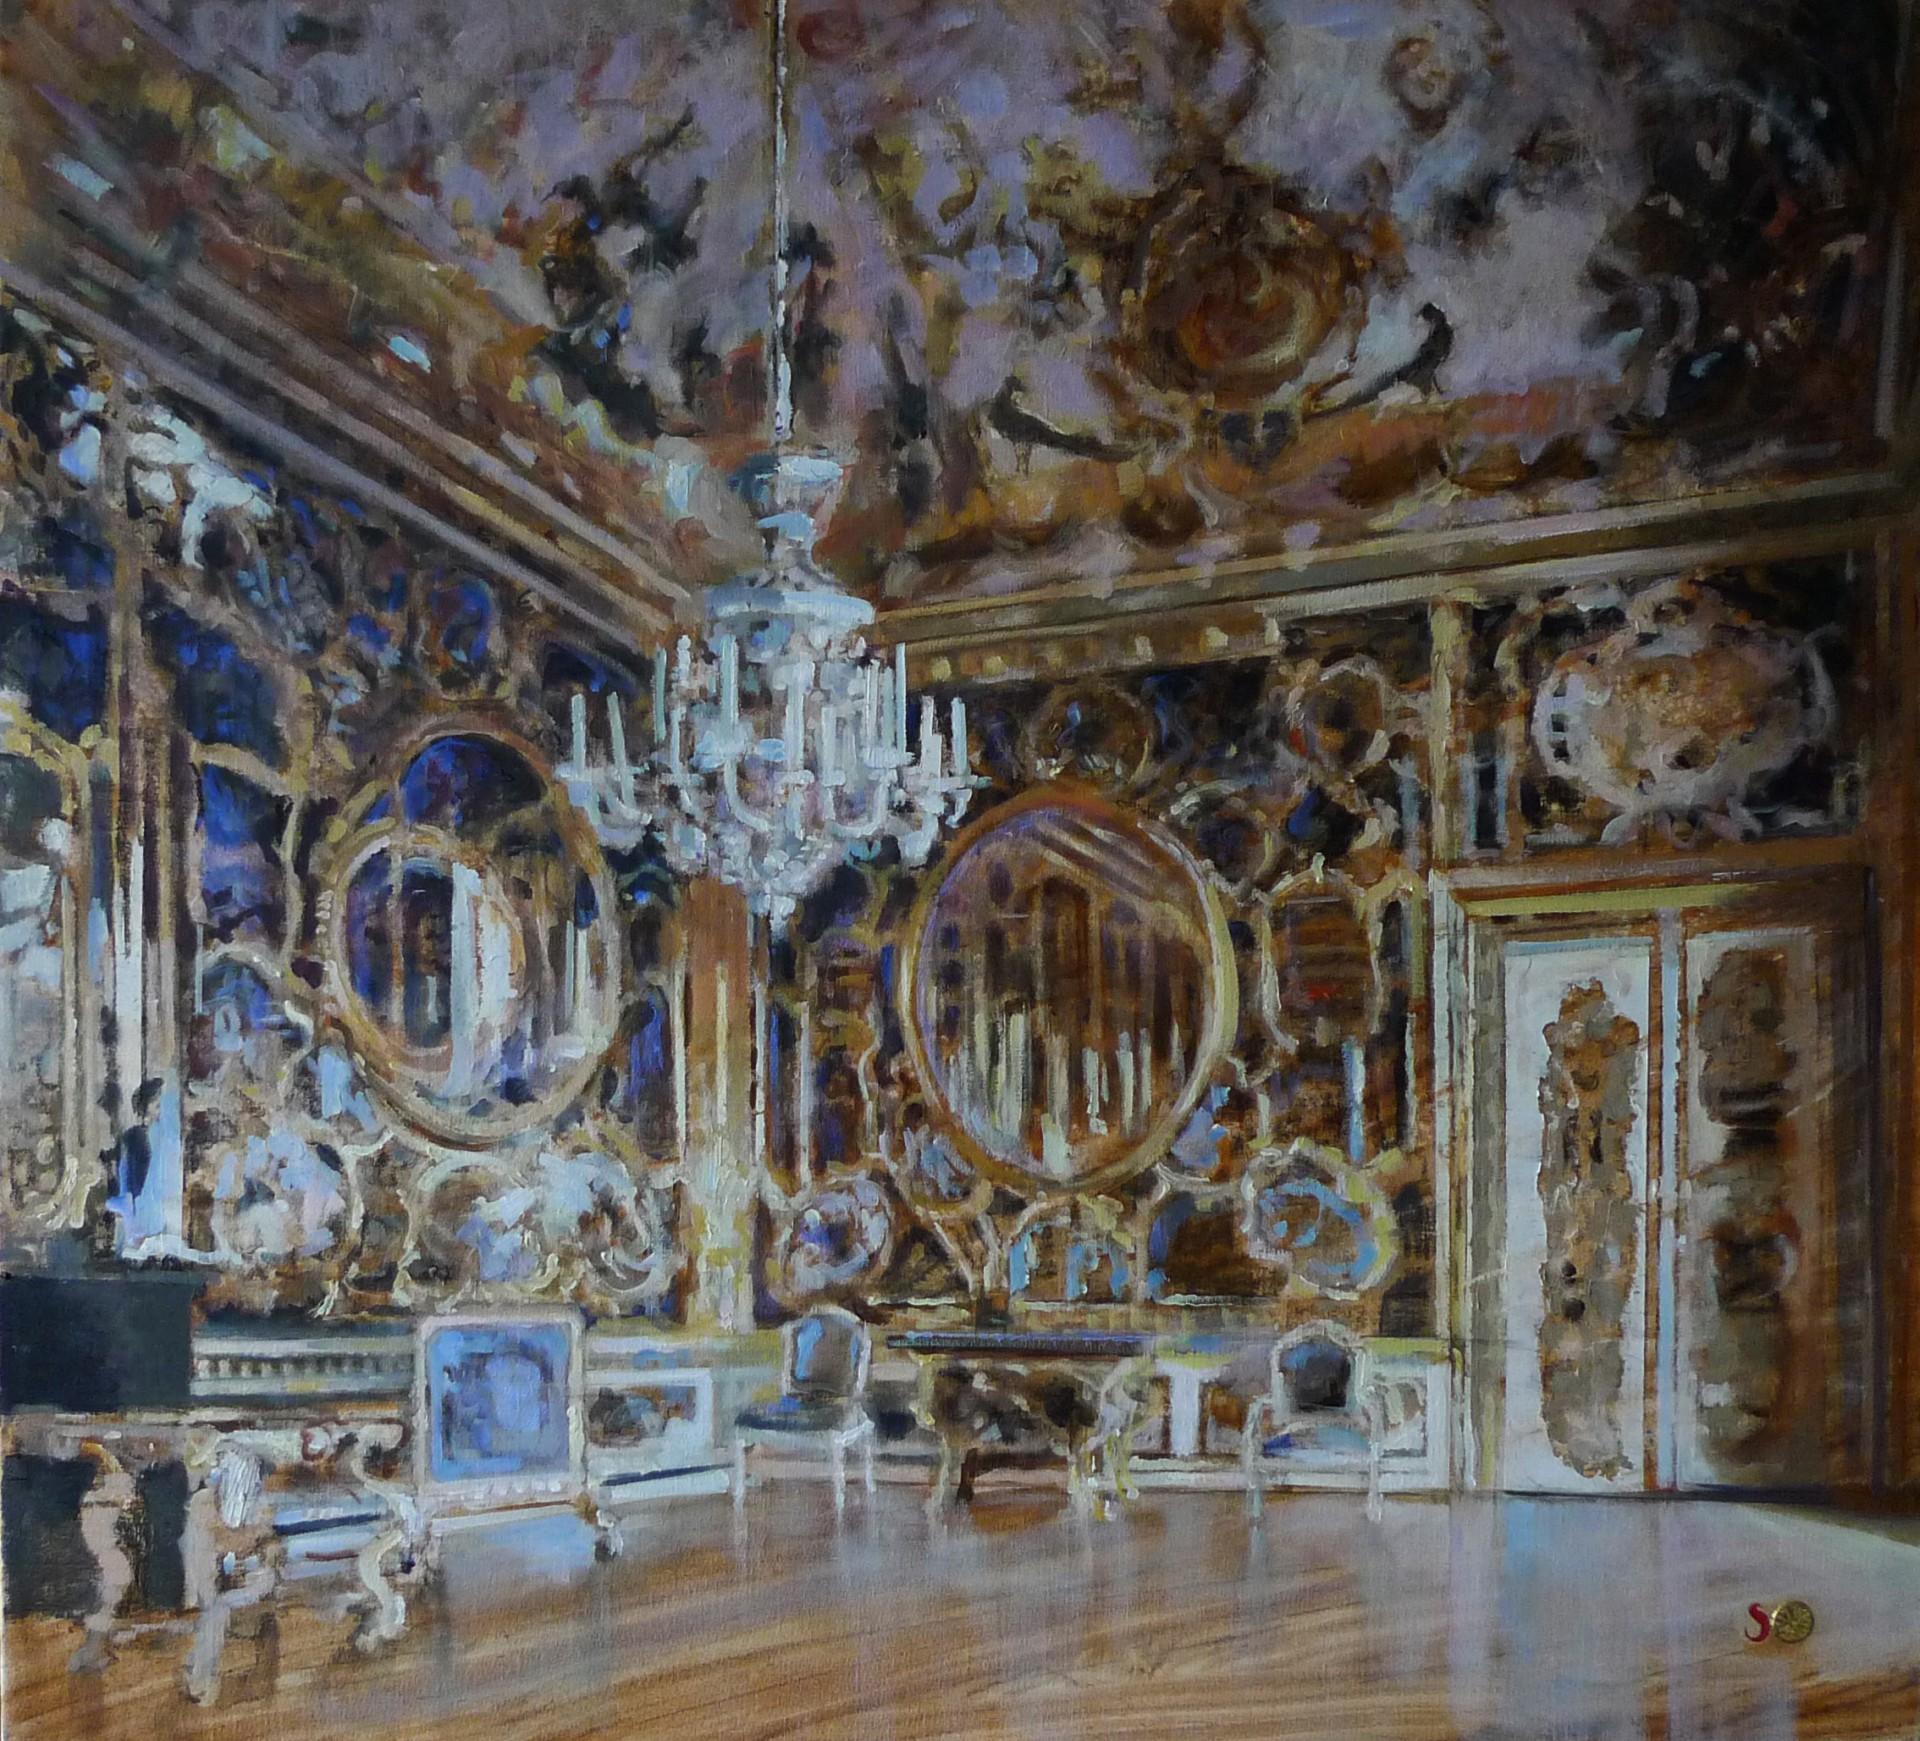 Mirror Room- 21st Century Contemporary Oil Painting of a Palace interior